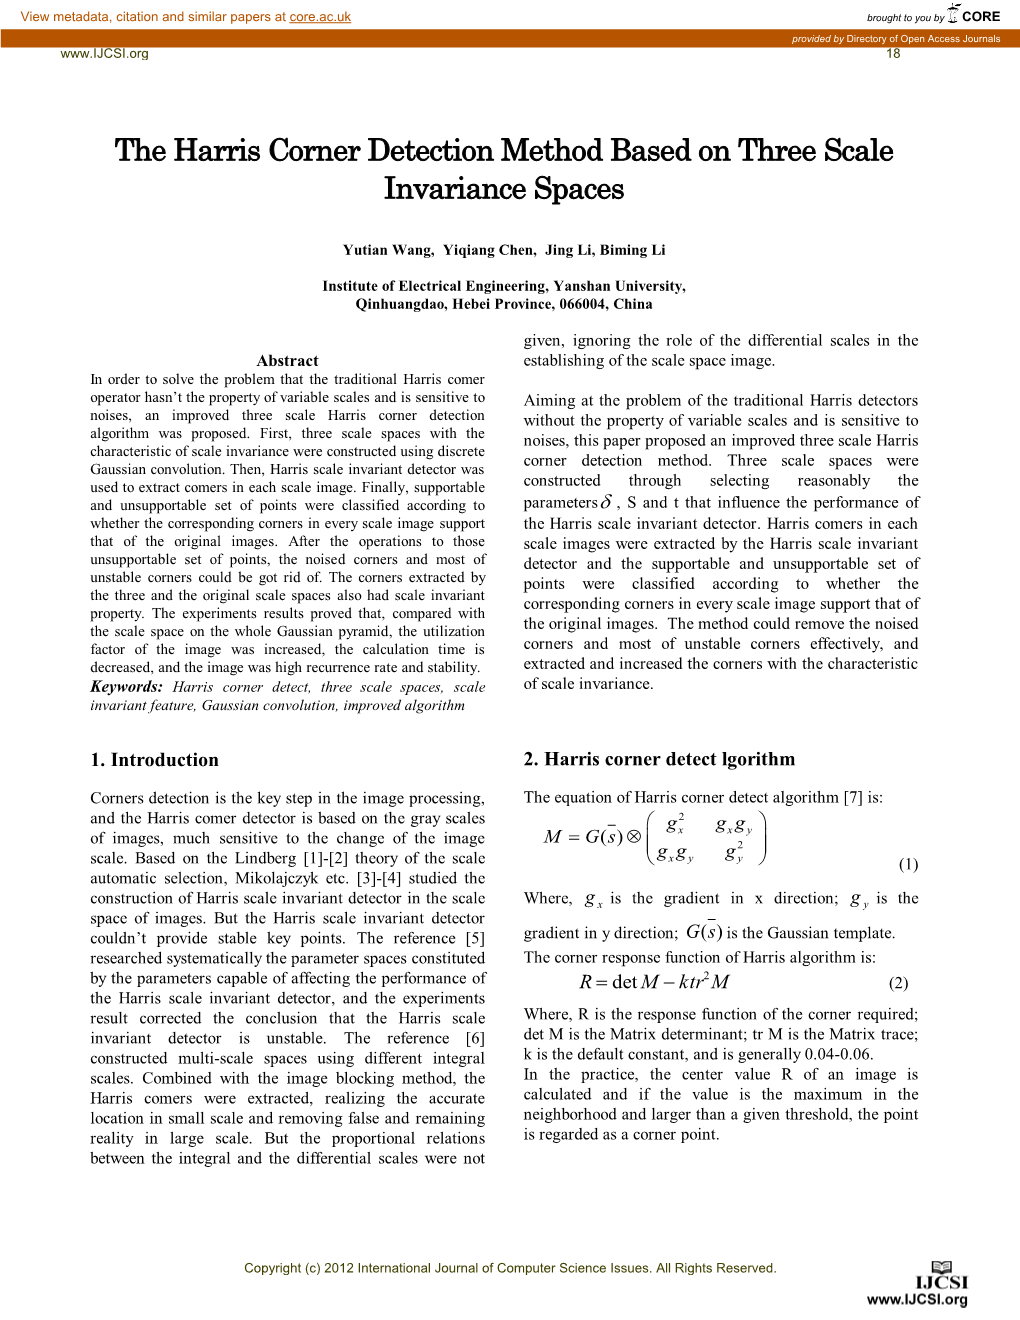 The Harris Corner Detection Method Based on Three Scale Invariance Spaces